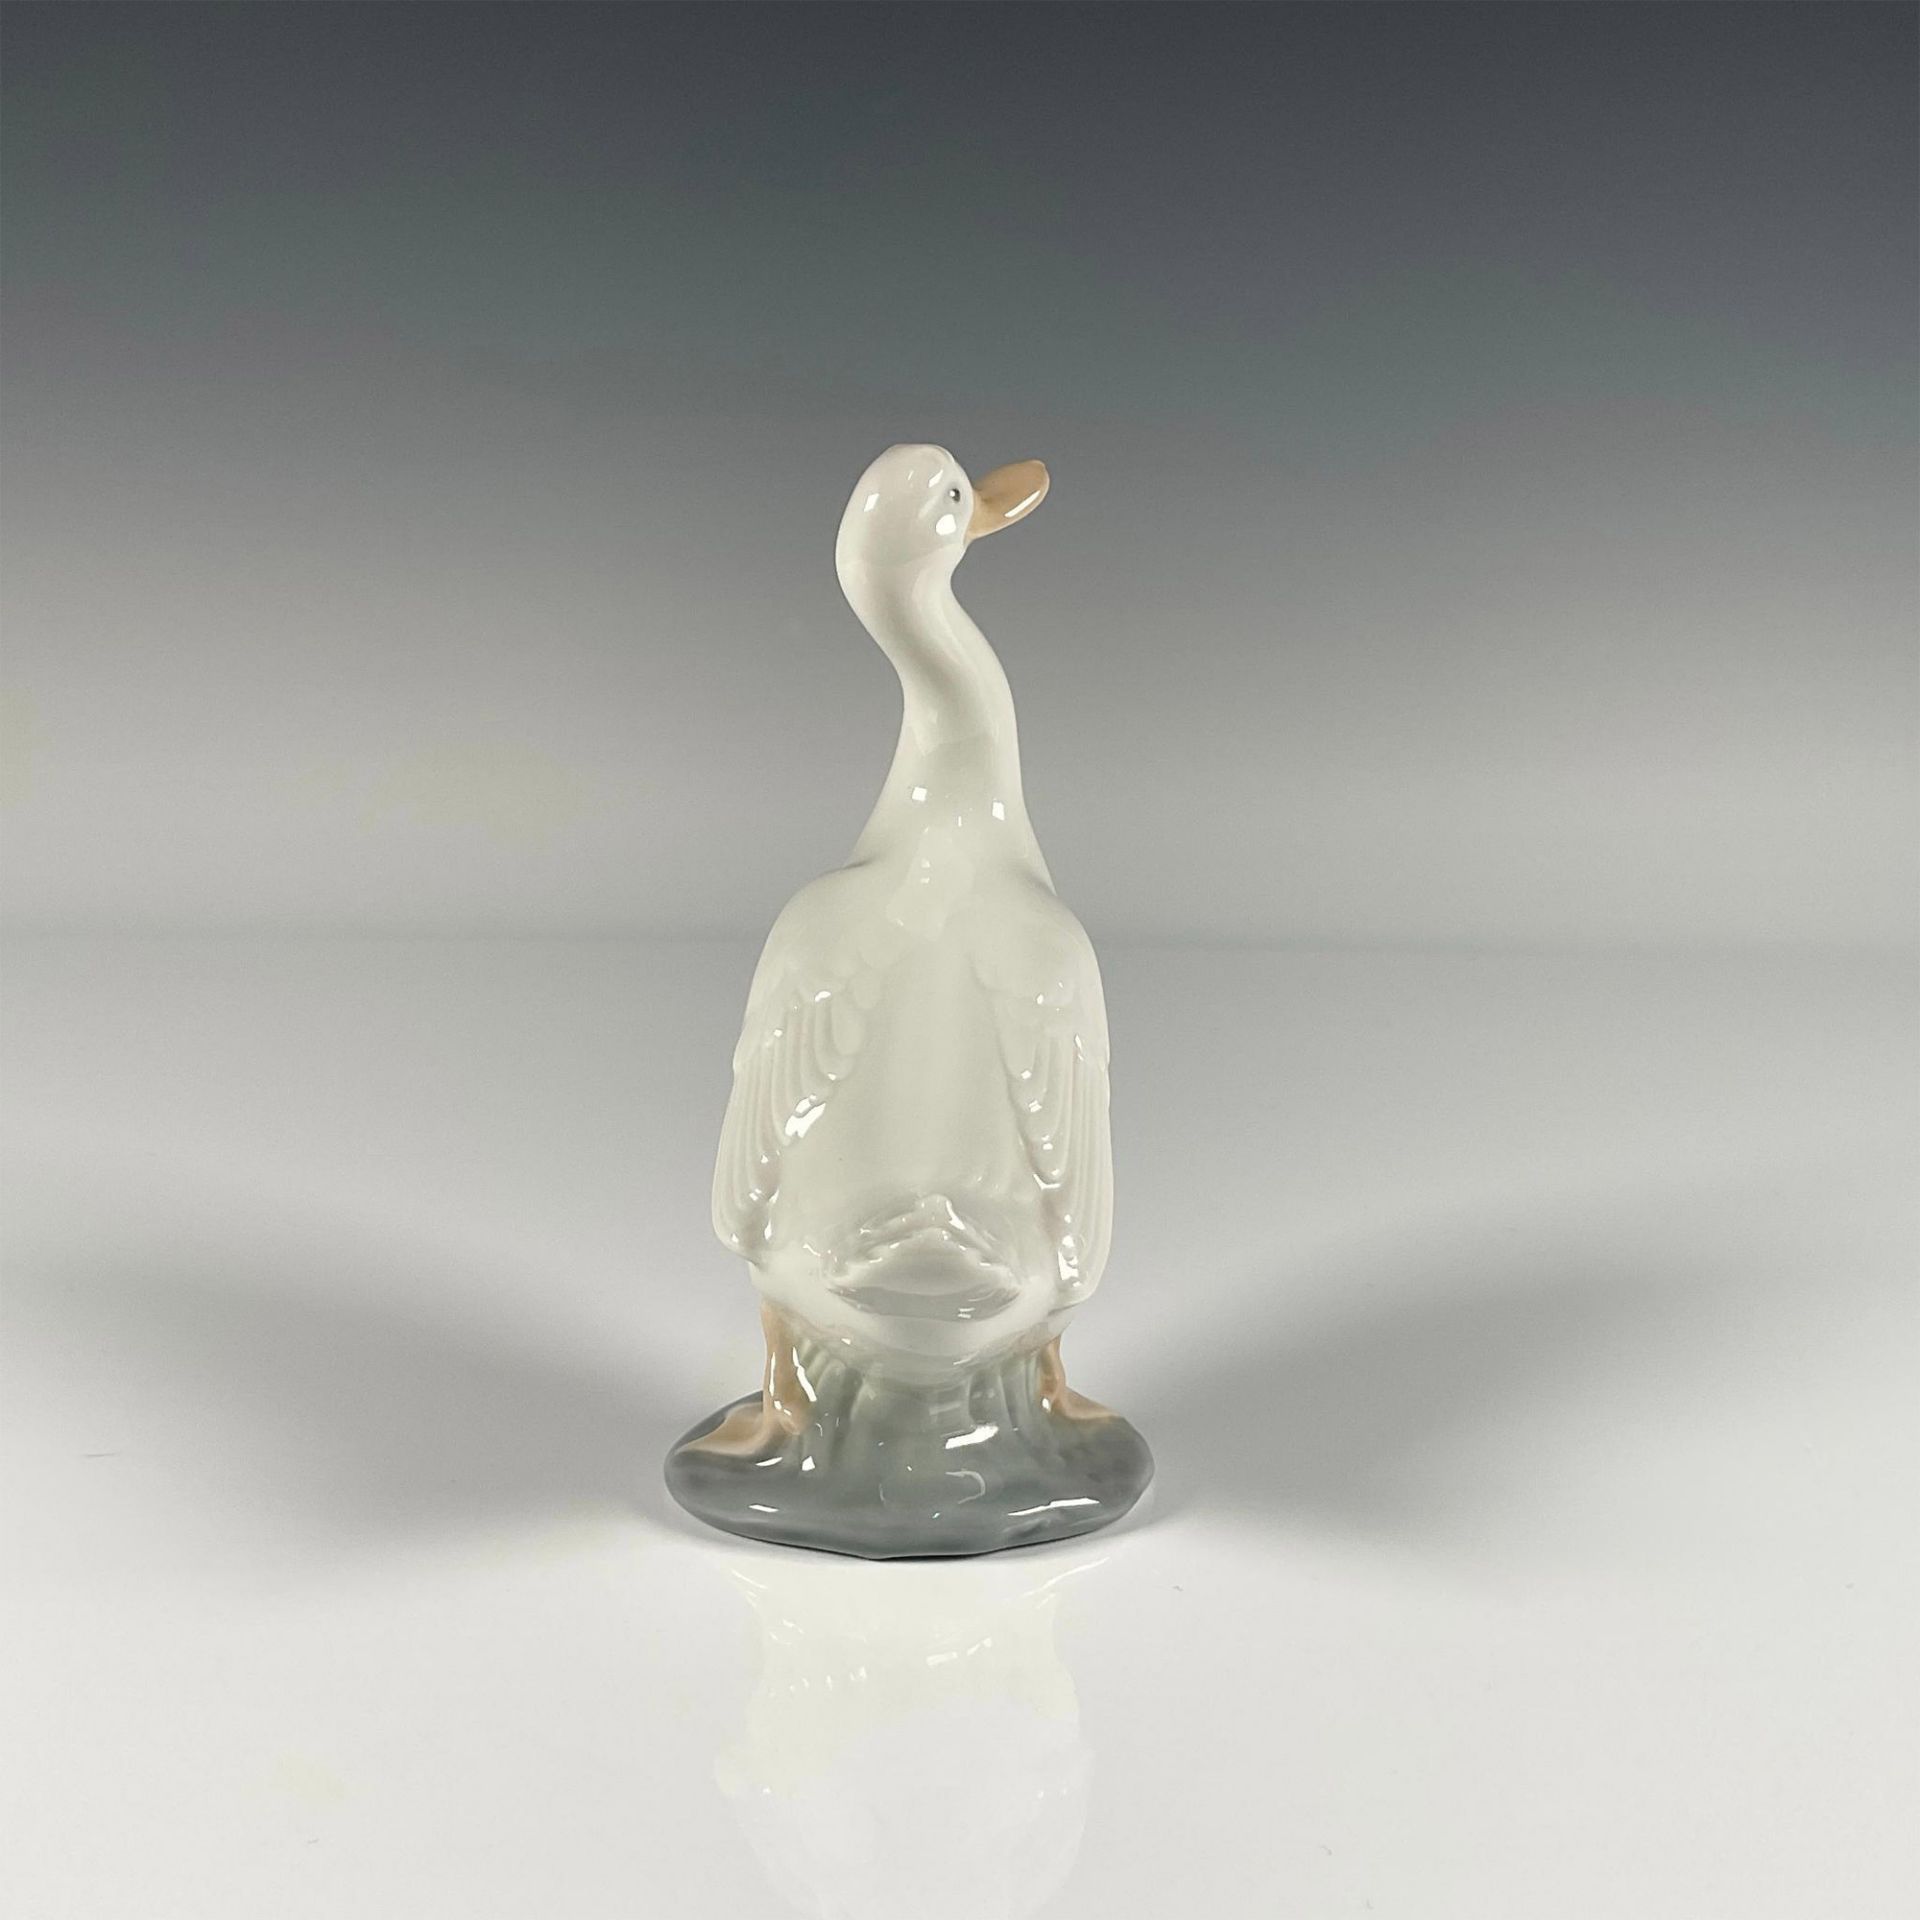 Nao by Lladro Porcelain Figurine, Little Duck - Image 2 of 3